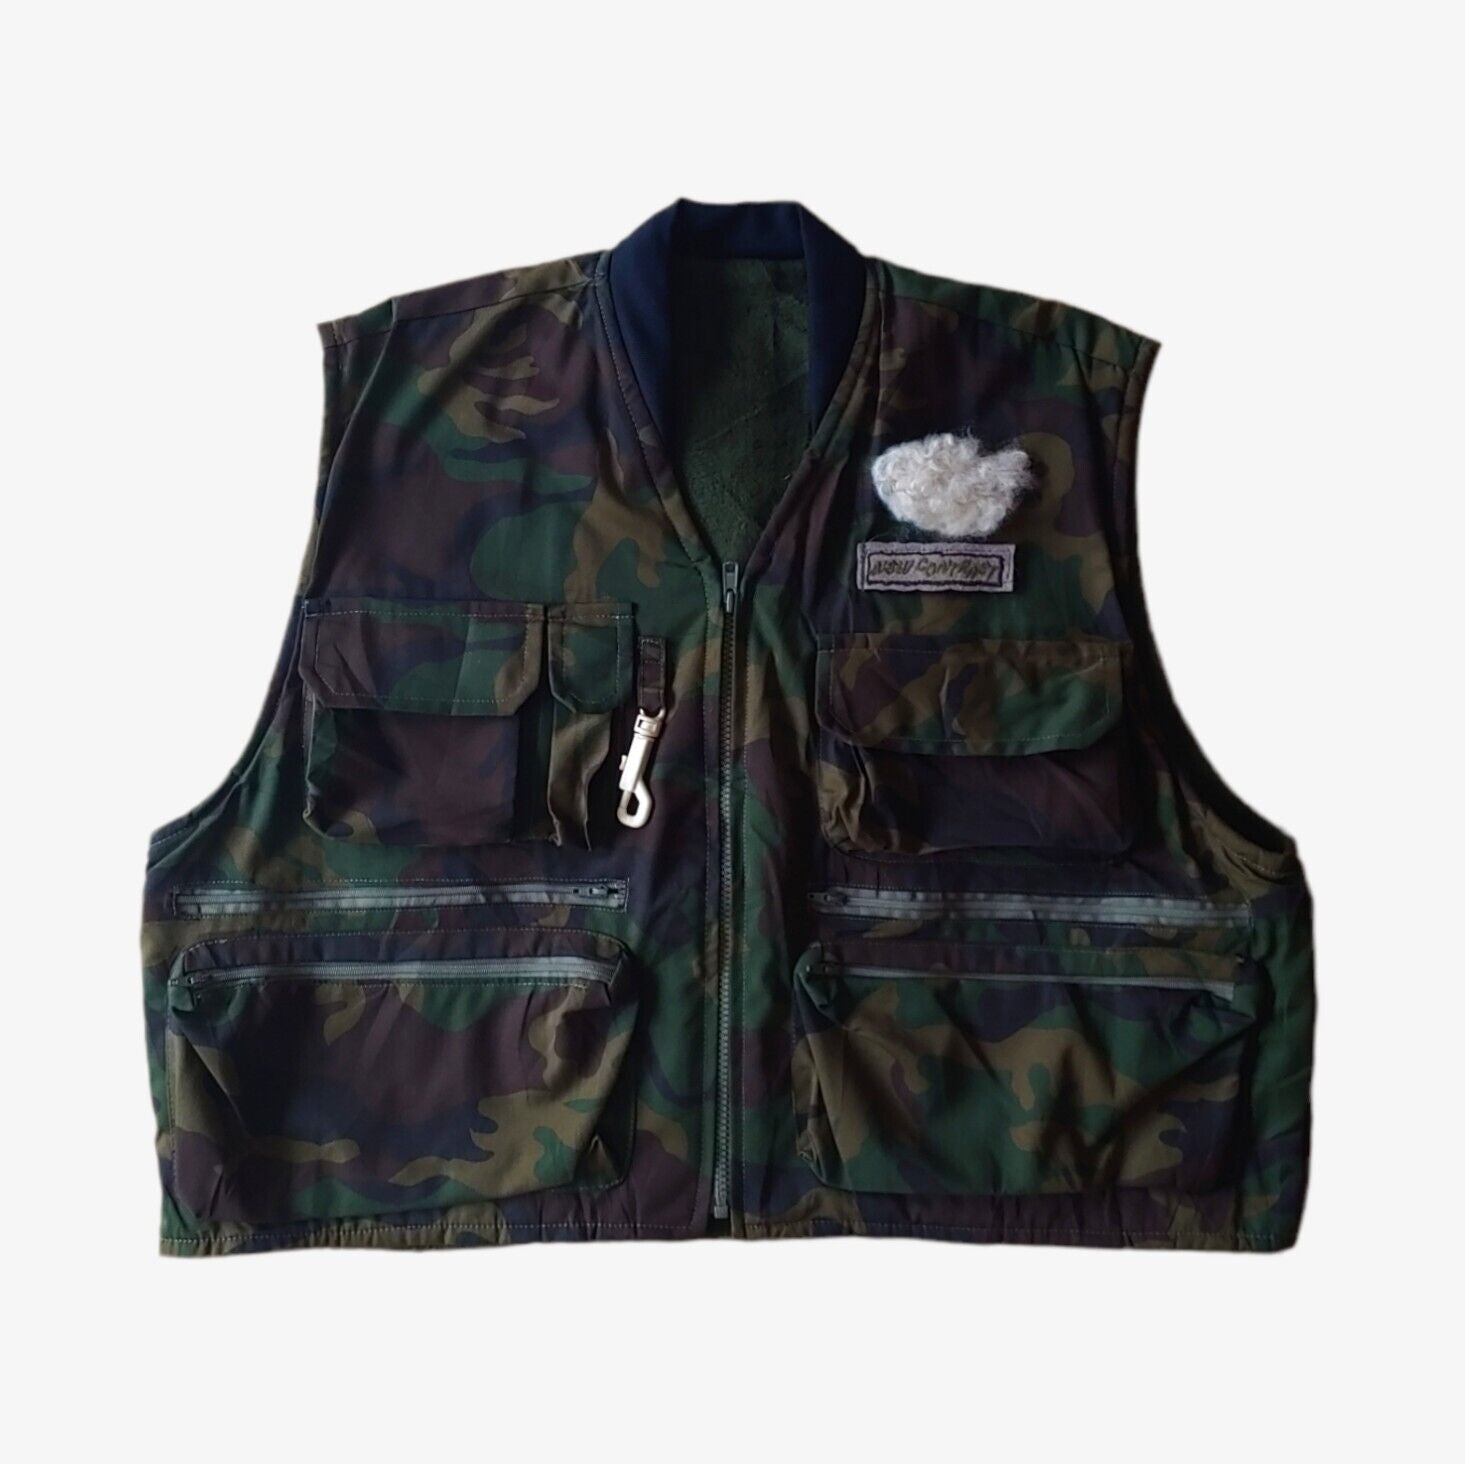 Vintage 1990s New Contrast Camouflage Hunting Utility Army Farmer Fishing Gilet - Casspios Dream